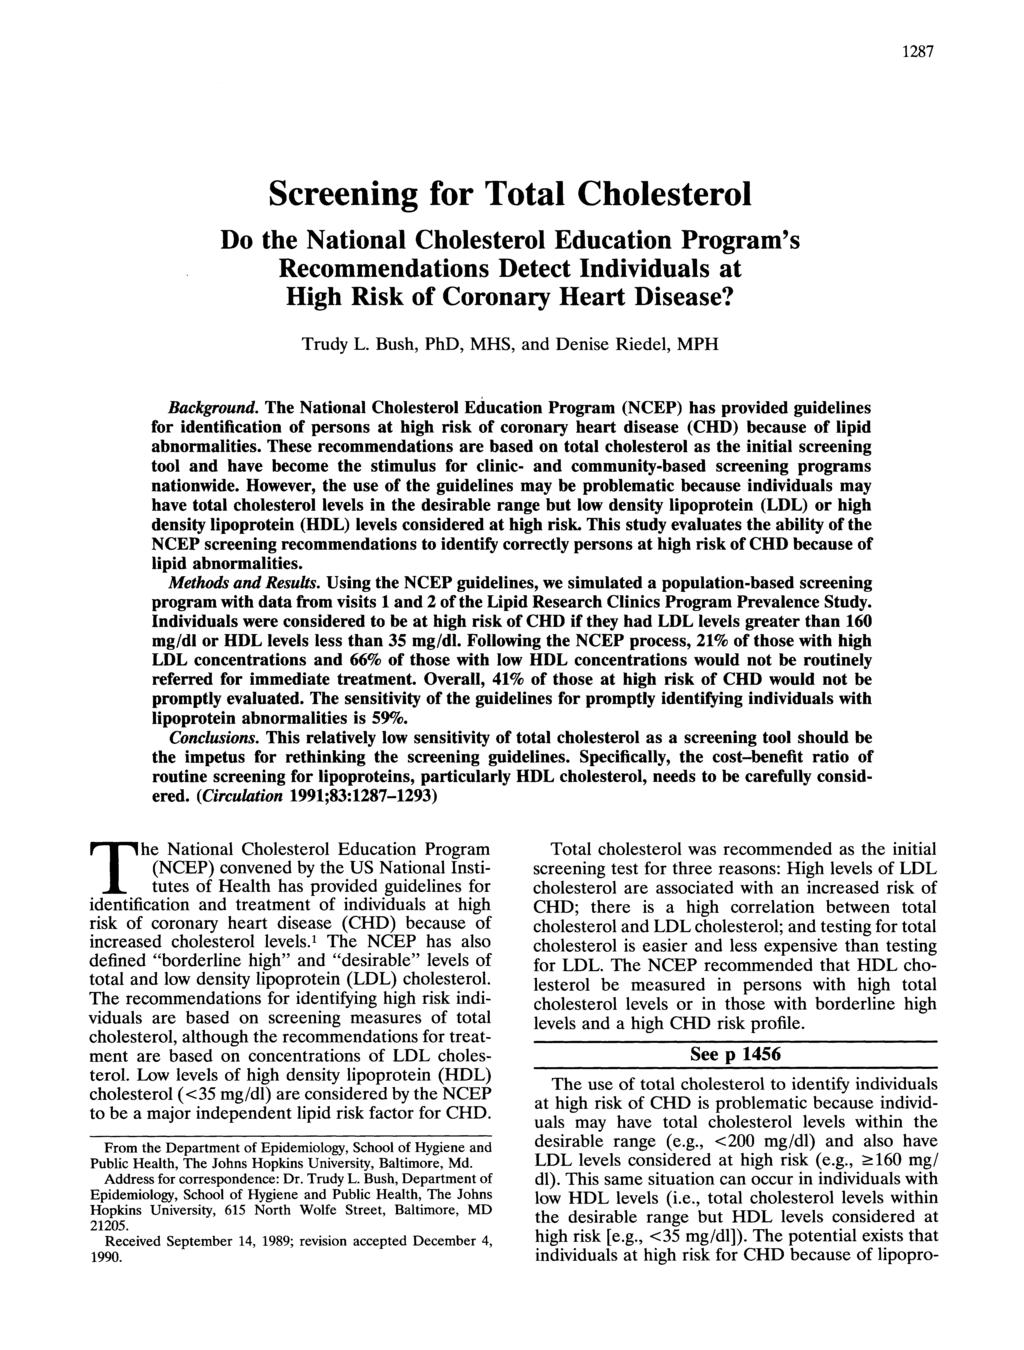 1287 Screening for Total Cholesterol Do the National Cholesterol Education Program's Recommendations Detect Individuals at High Risk of Coronary Heart Disease? Trudy L.